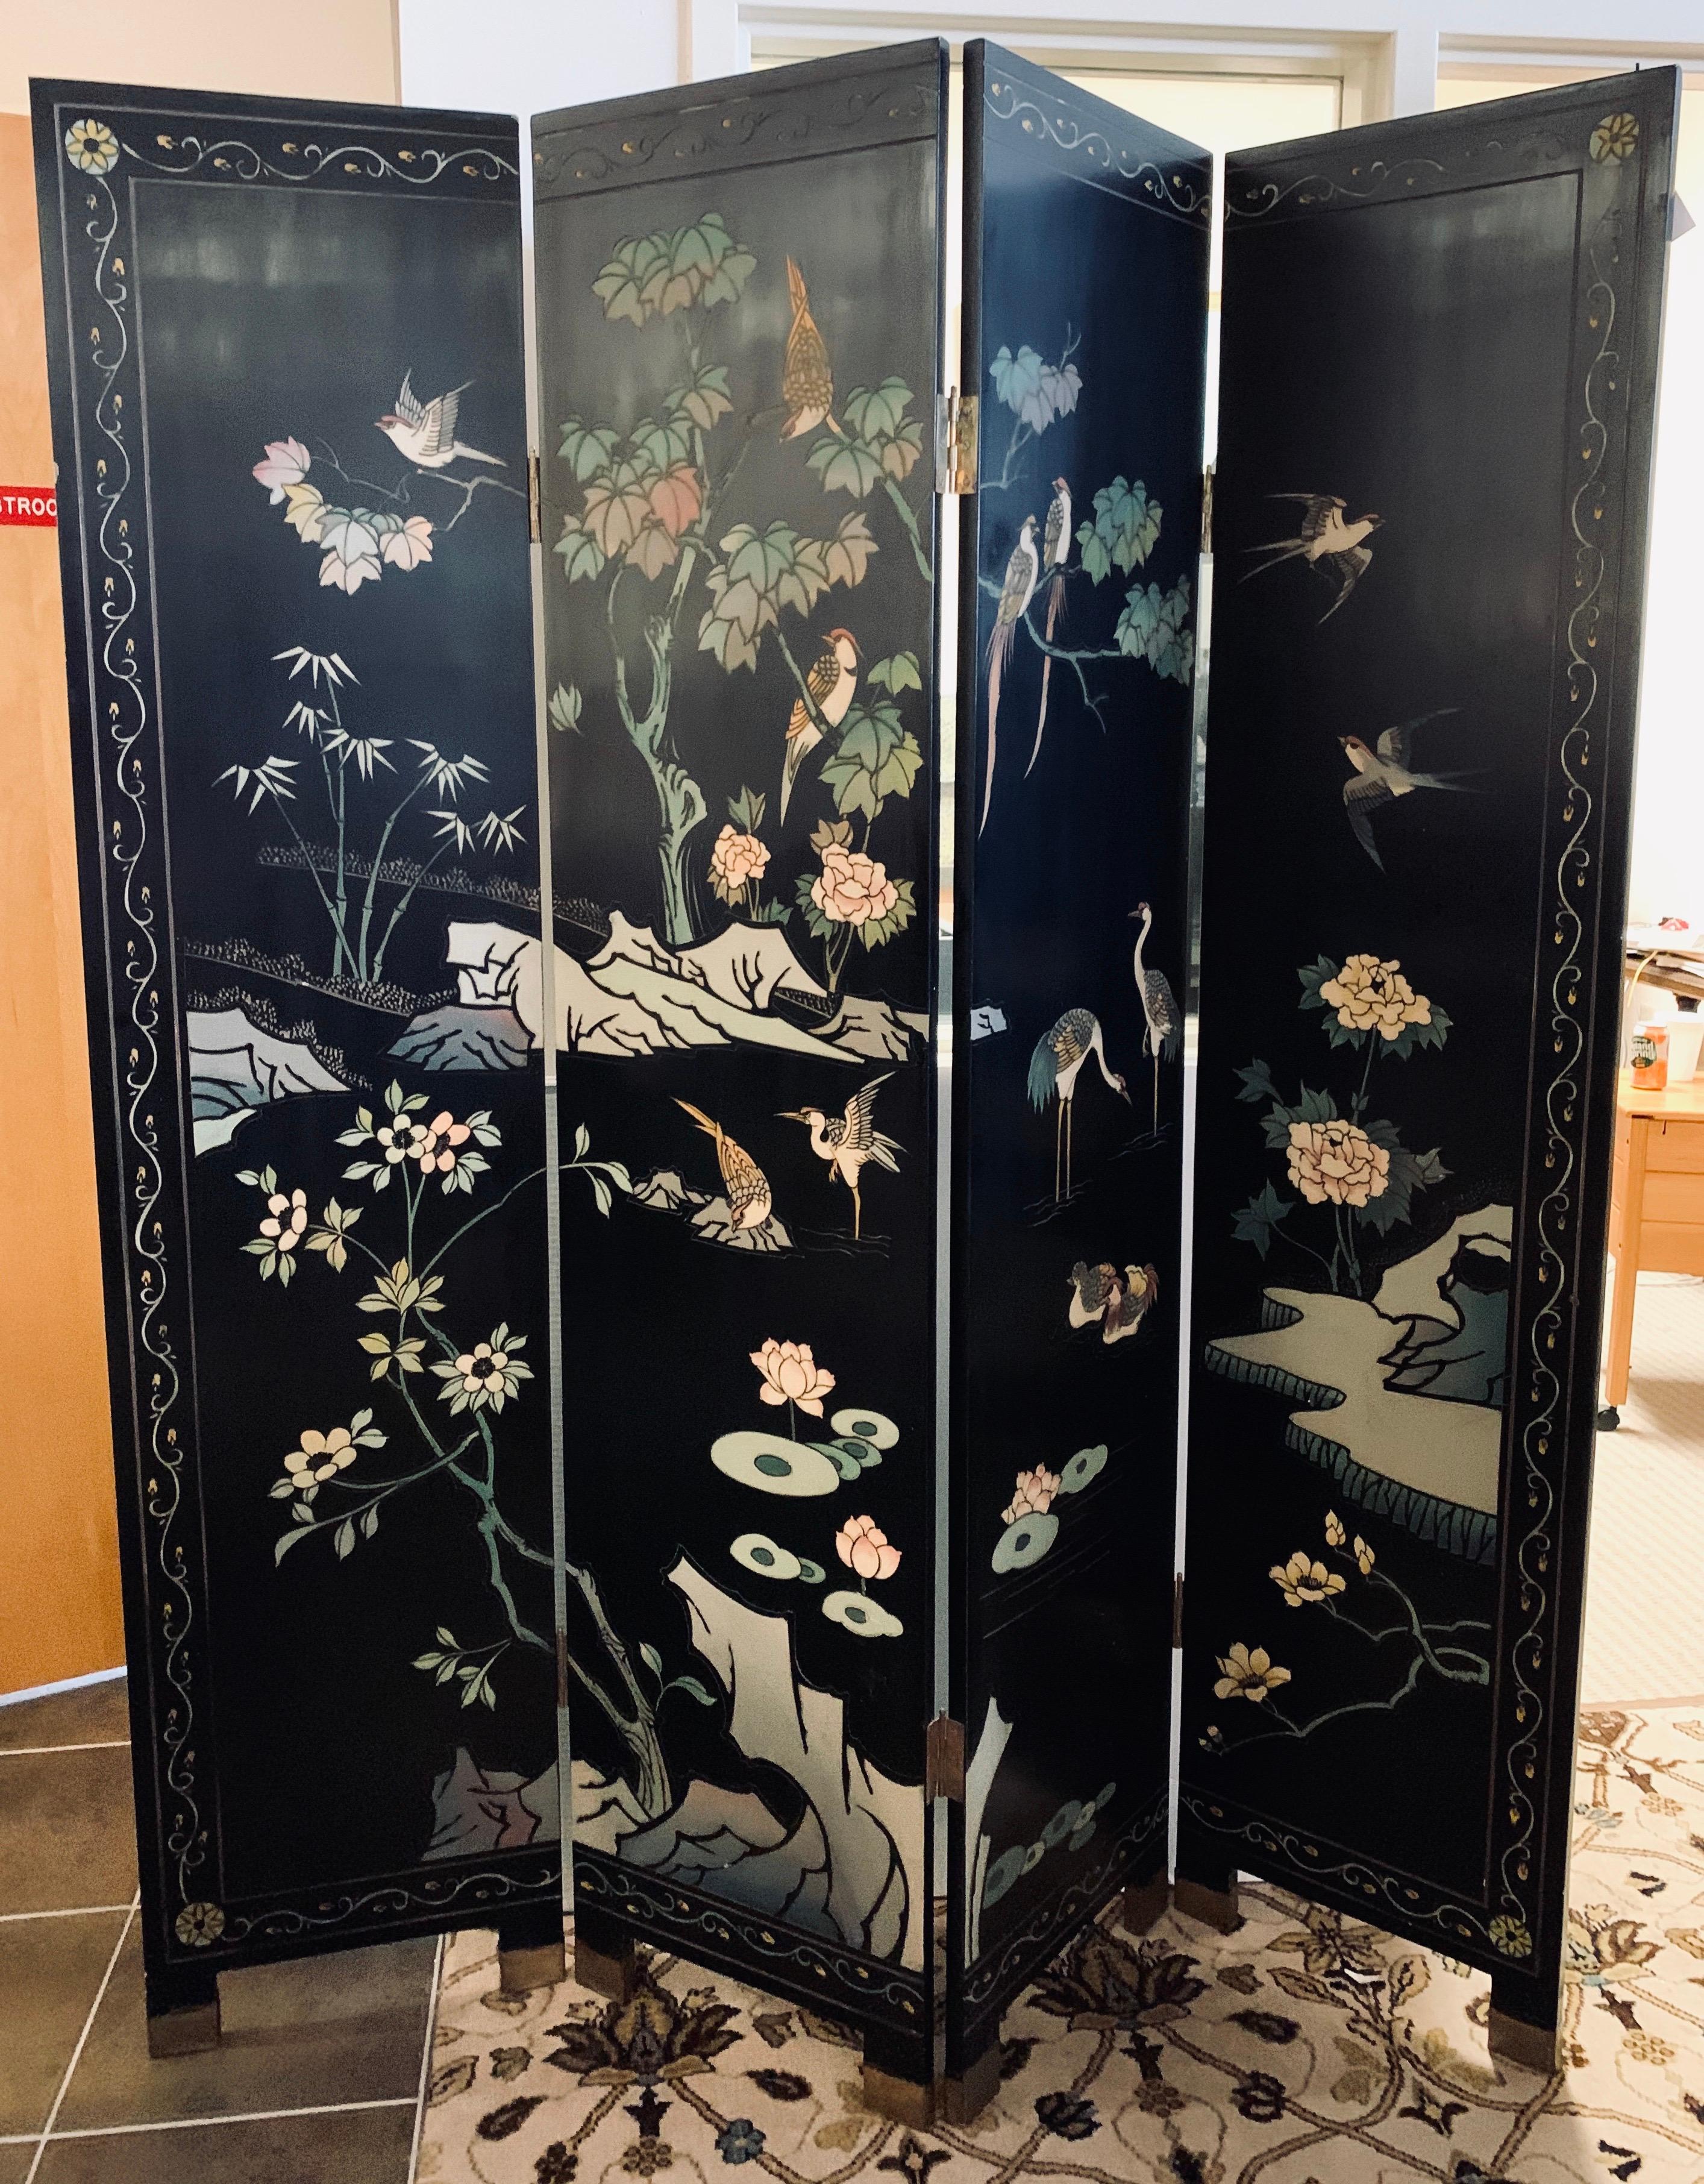 Elegant black lacquered four panel Chinese chinoiserie folding screen/room divider. These screens can be used to divide space but are also use hung directly on walls as art. The latter way looks magnificent.
Now, more than ever, home is where the